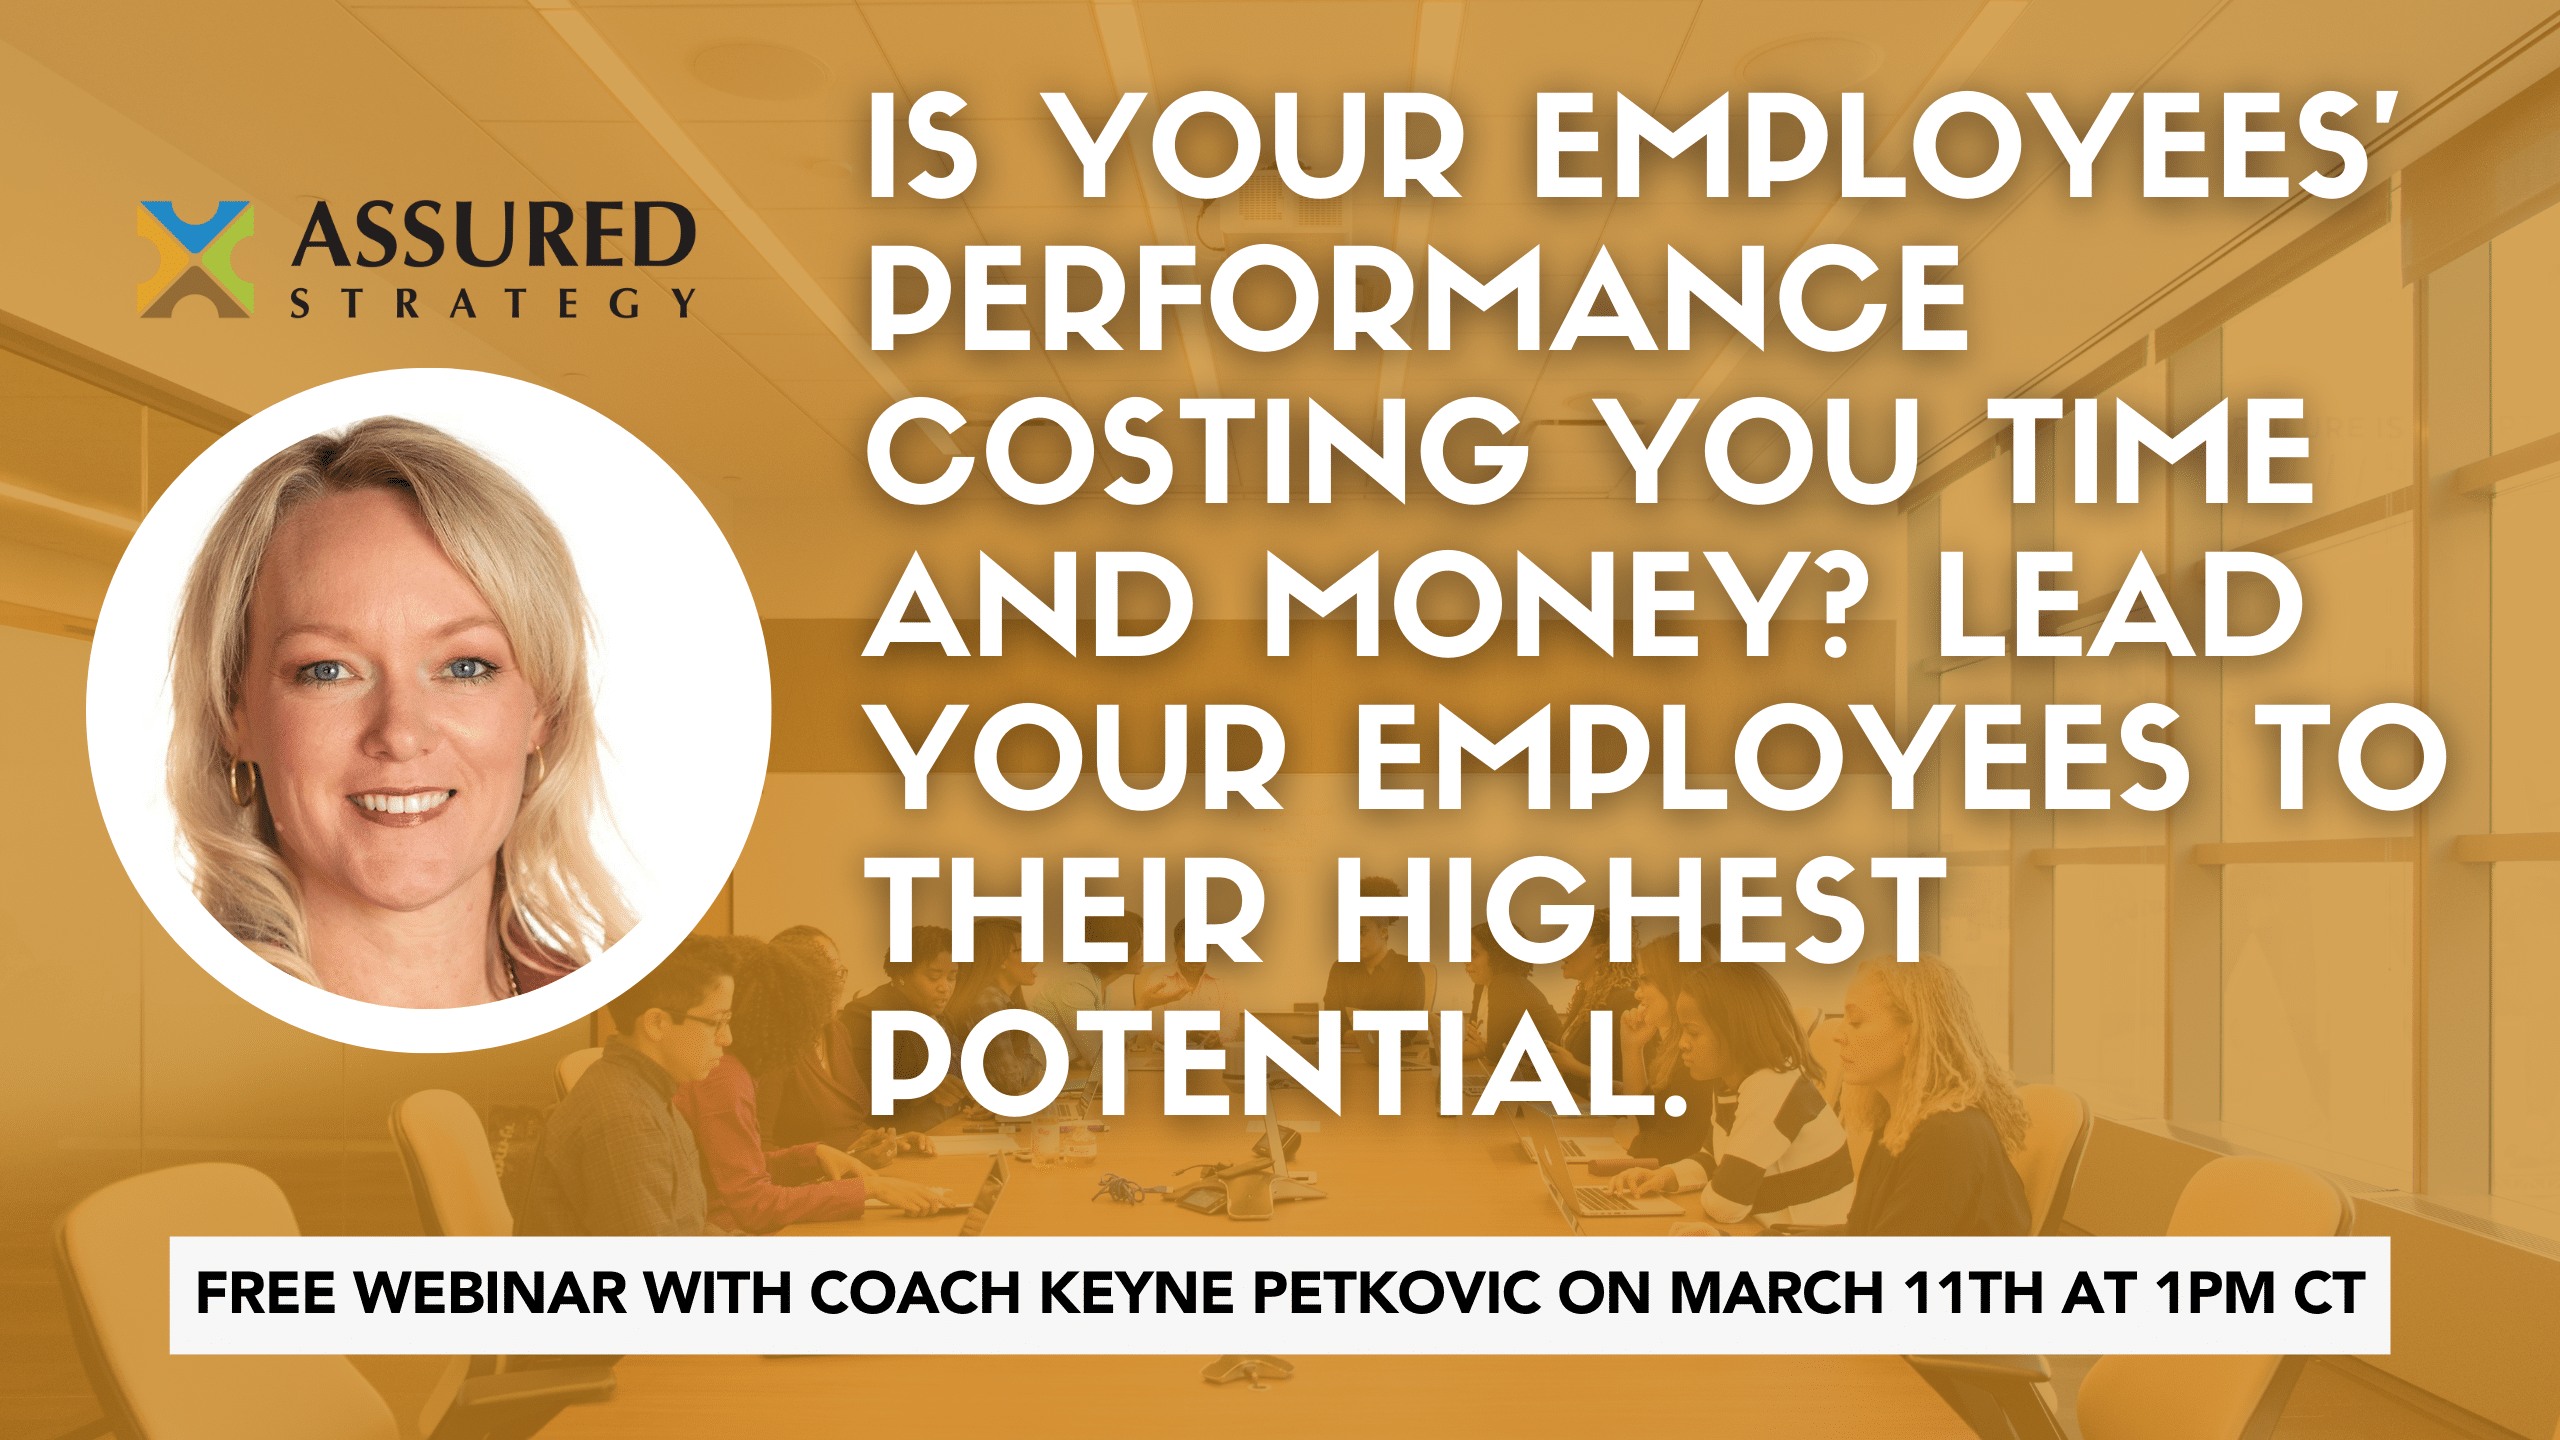 Free Webinar: How to Coach Employees for Top Performance – March 11th from 1-2pm CT